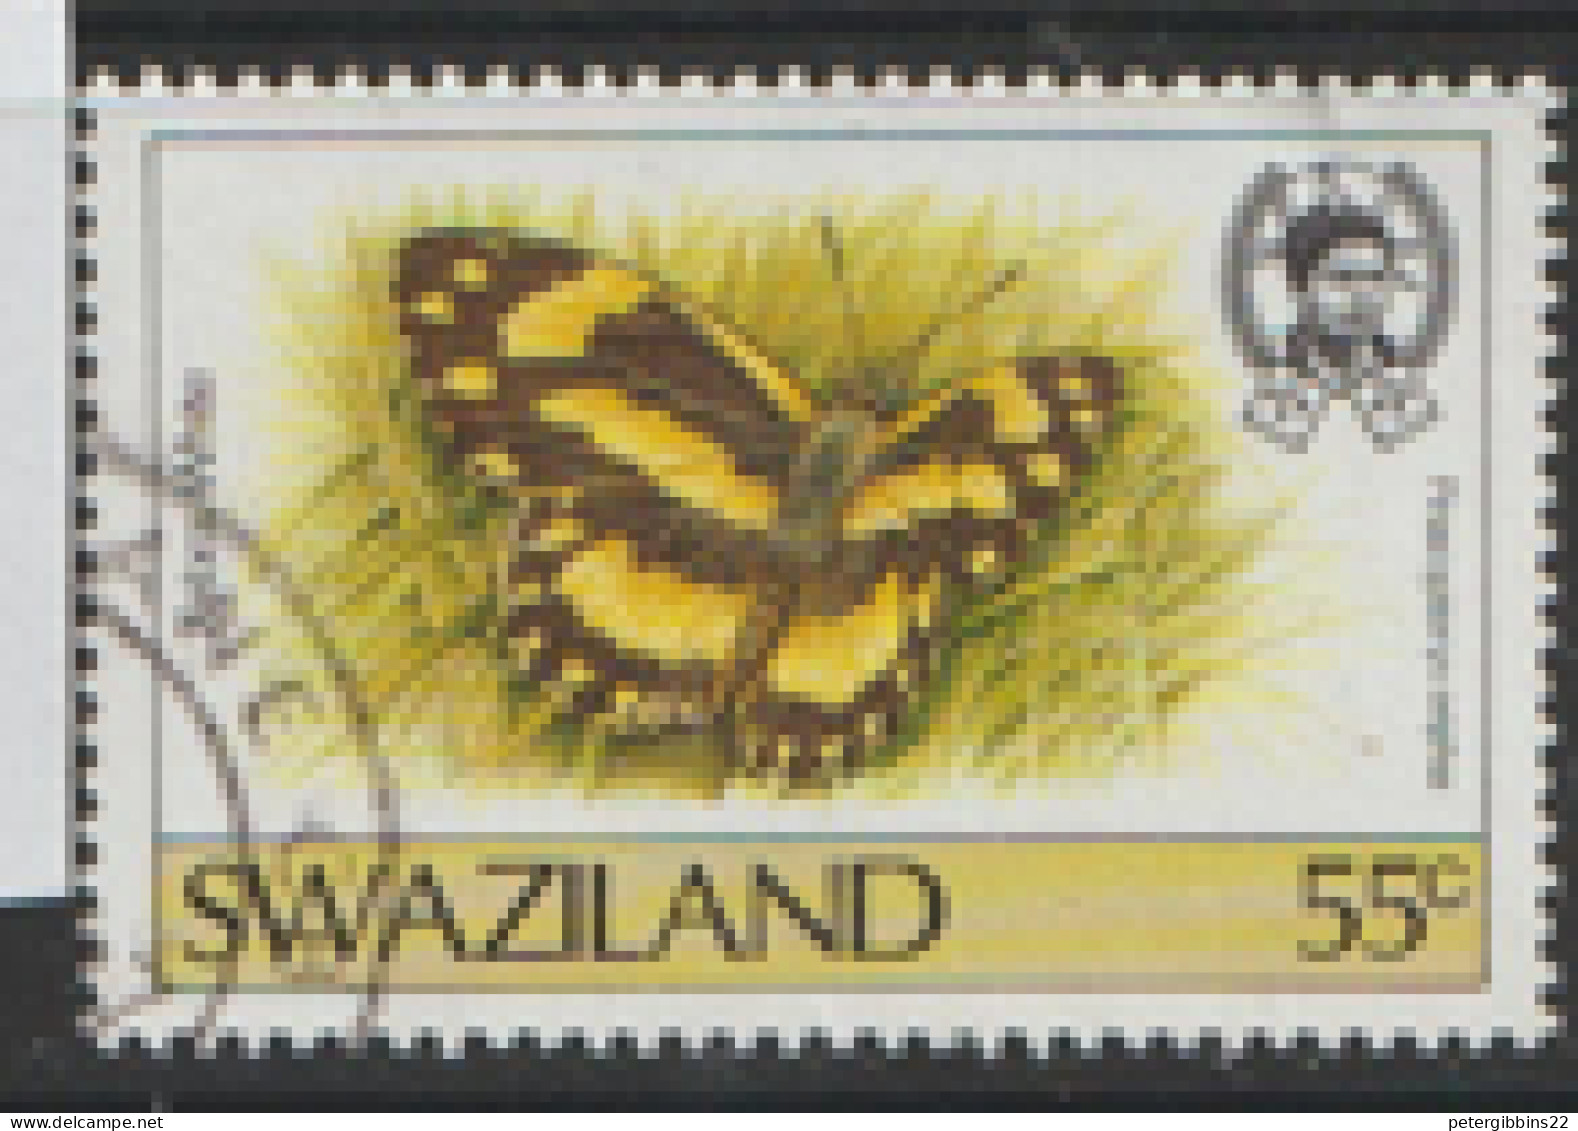 Swaziland  1992  SG  615  55c  Butterfly Fine Used - Swaziland (...-1967)